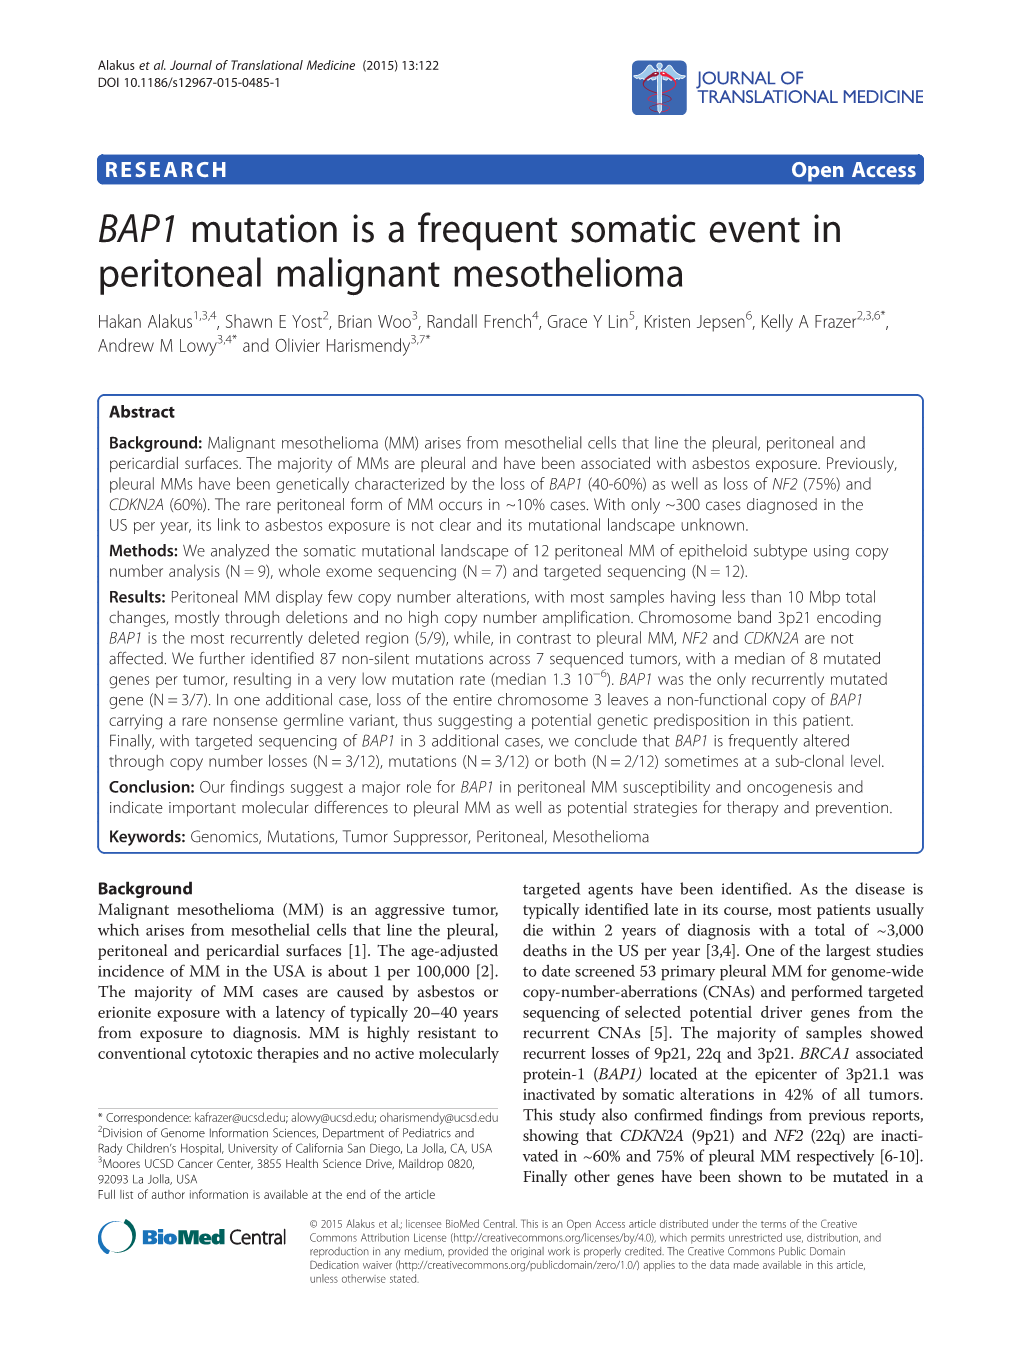 BAP1 Mutation Is a Frequent Somatic Event in Peritoneal Malignant